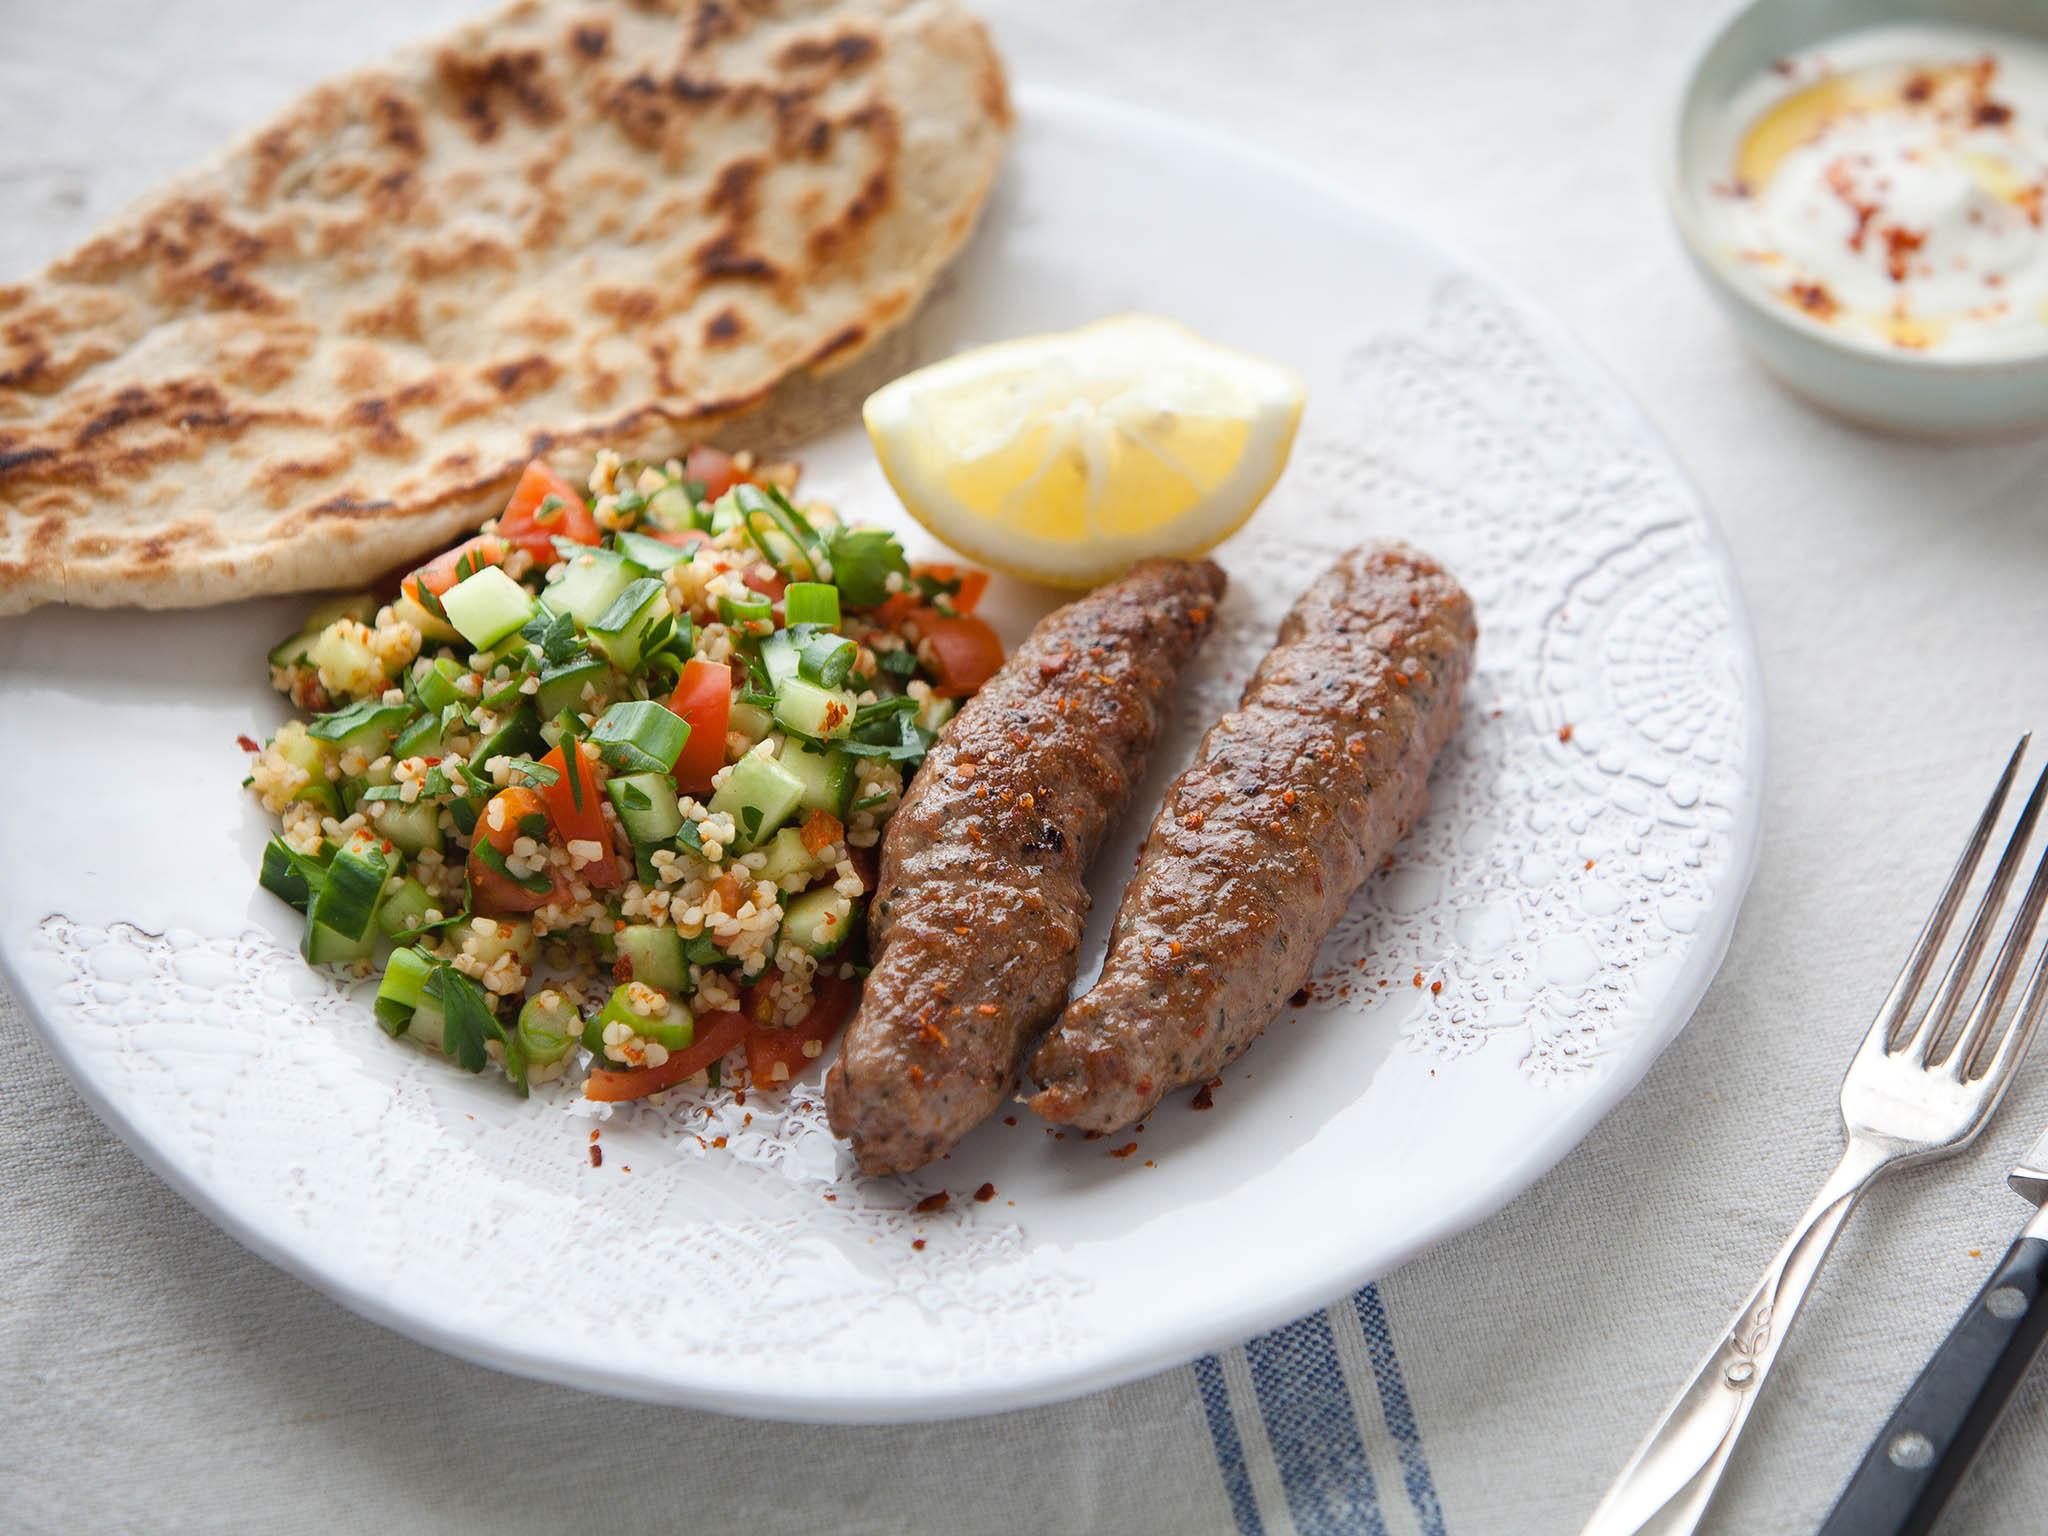 The goat kofte is best served immediately after cooking while it is still warm